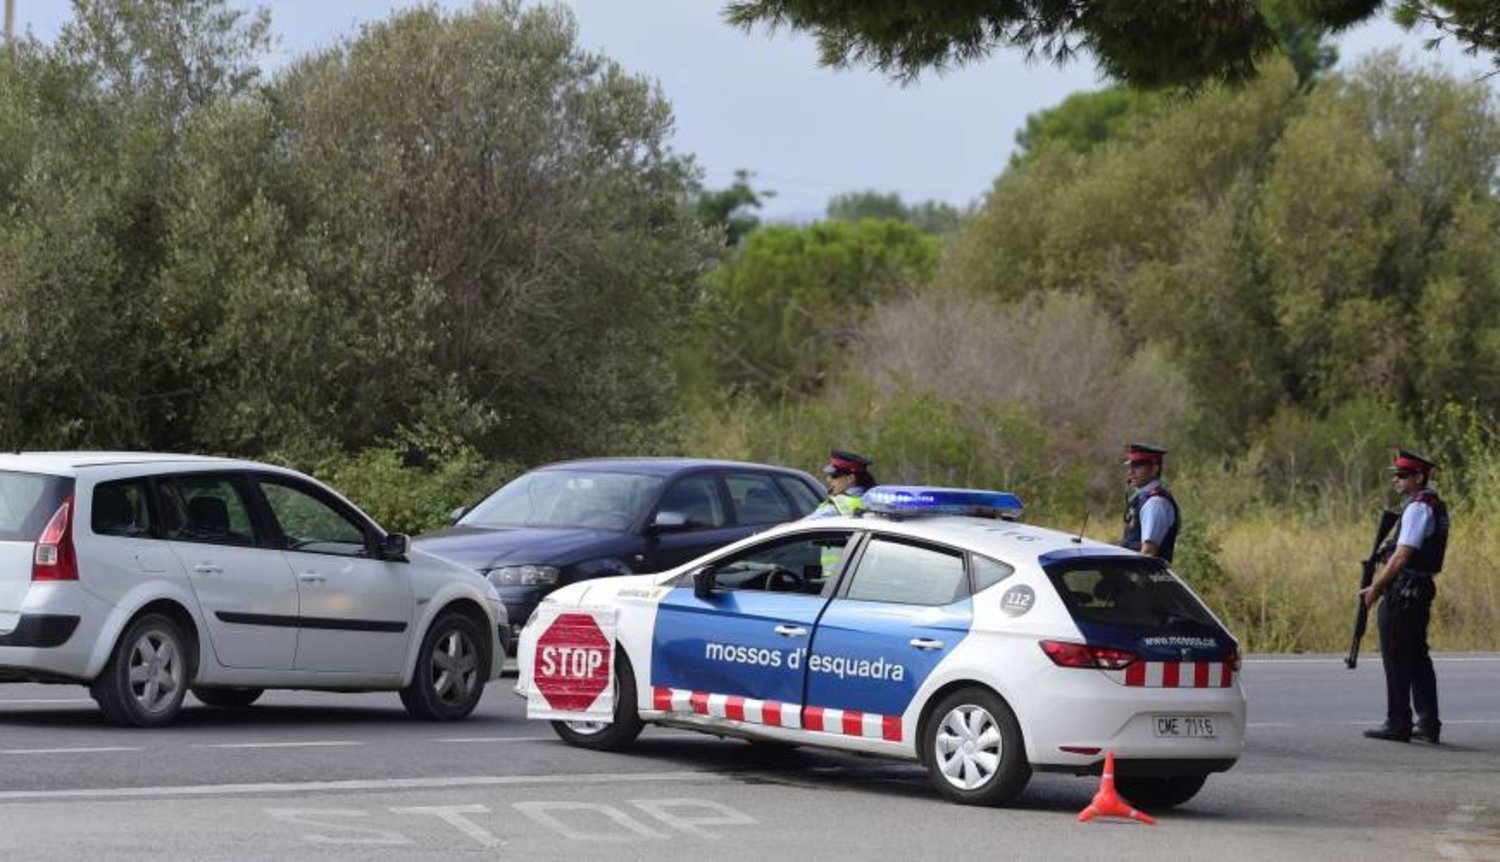 Police officers block a road near Alcanar, Spain, as part of an operation to find a suspect of Barcelona's attack. AFP